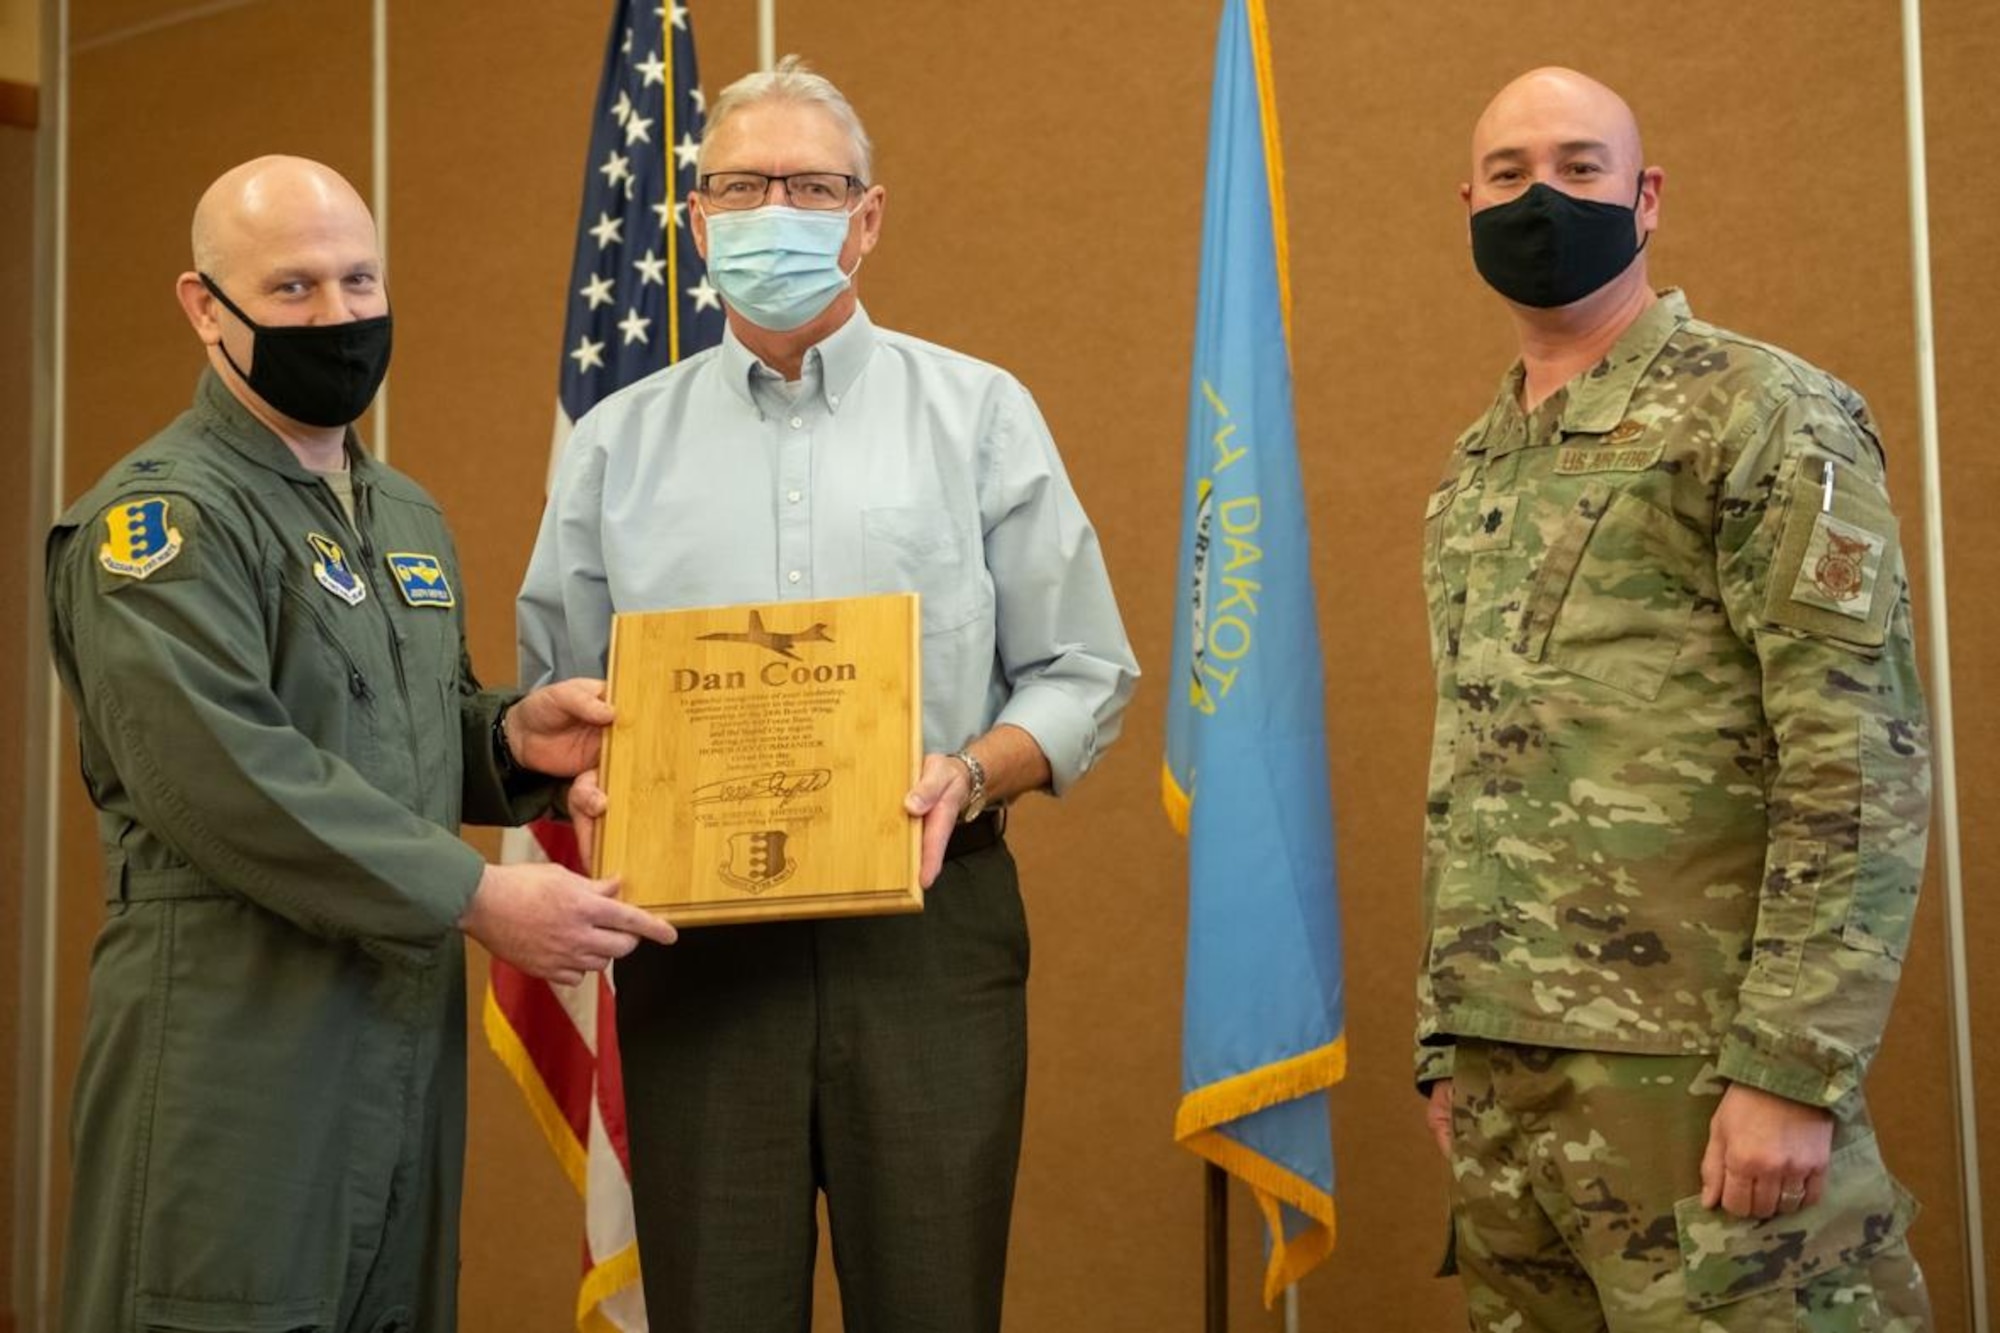 Col. Joseph Sheffield, 28th Bomb Wing commander (left), and Lt. Col. David Berrios, 28th Civil Engineer Squadron commander (right), present Dan Coon, former operation management engineer for the City of Rapid City, with a plaque in appreciation for his time as the 28th CES honorary commander during a special hail and farewell event at The Monument Convention Center in Rapid City, S.D., Jan. 19, 2022.